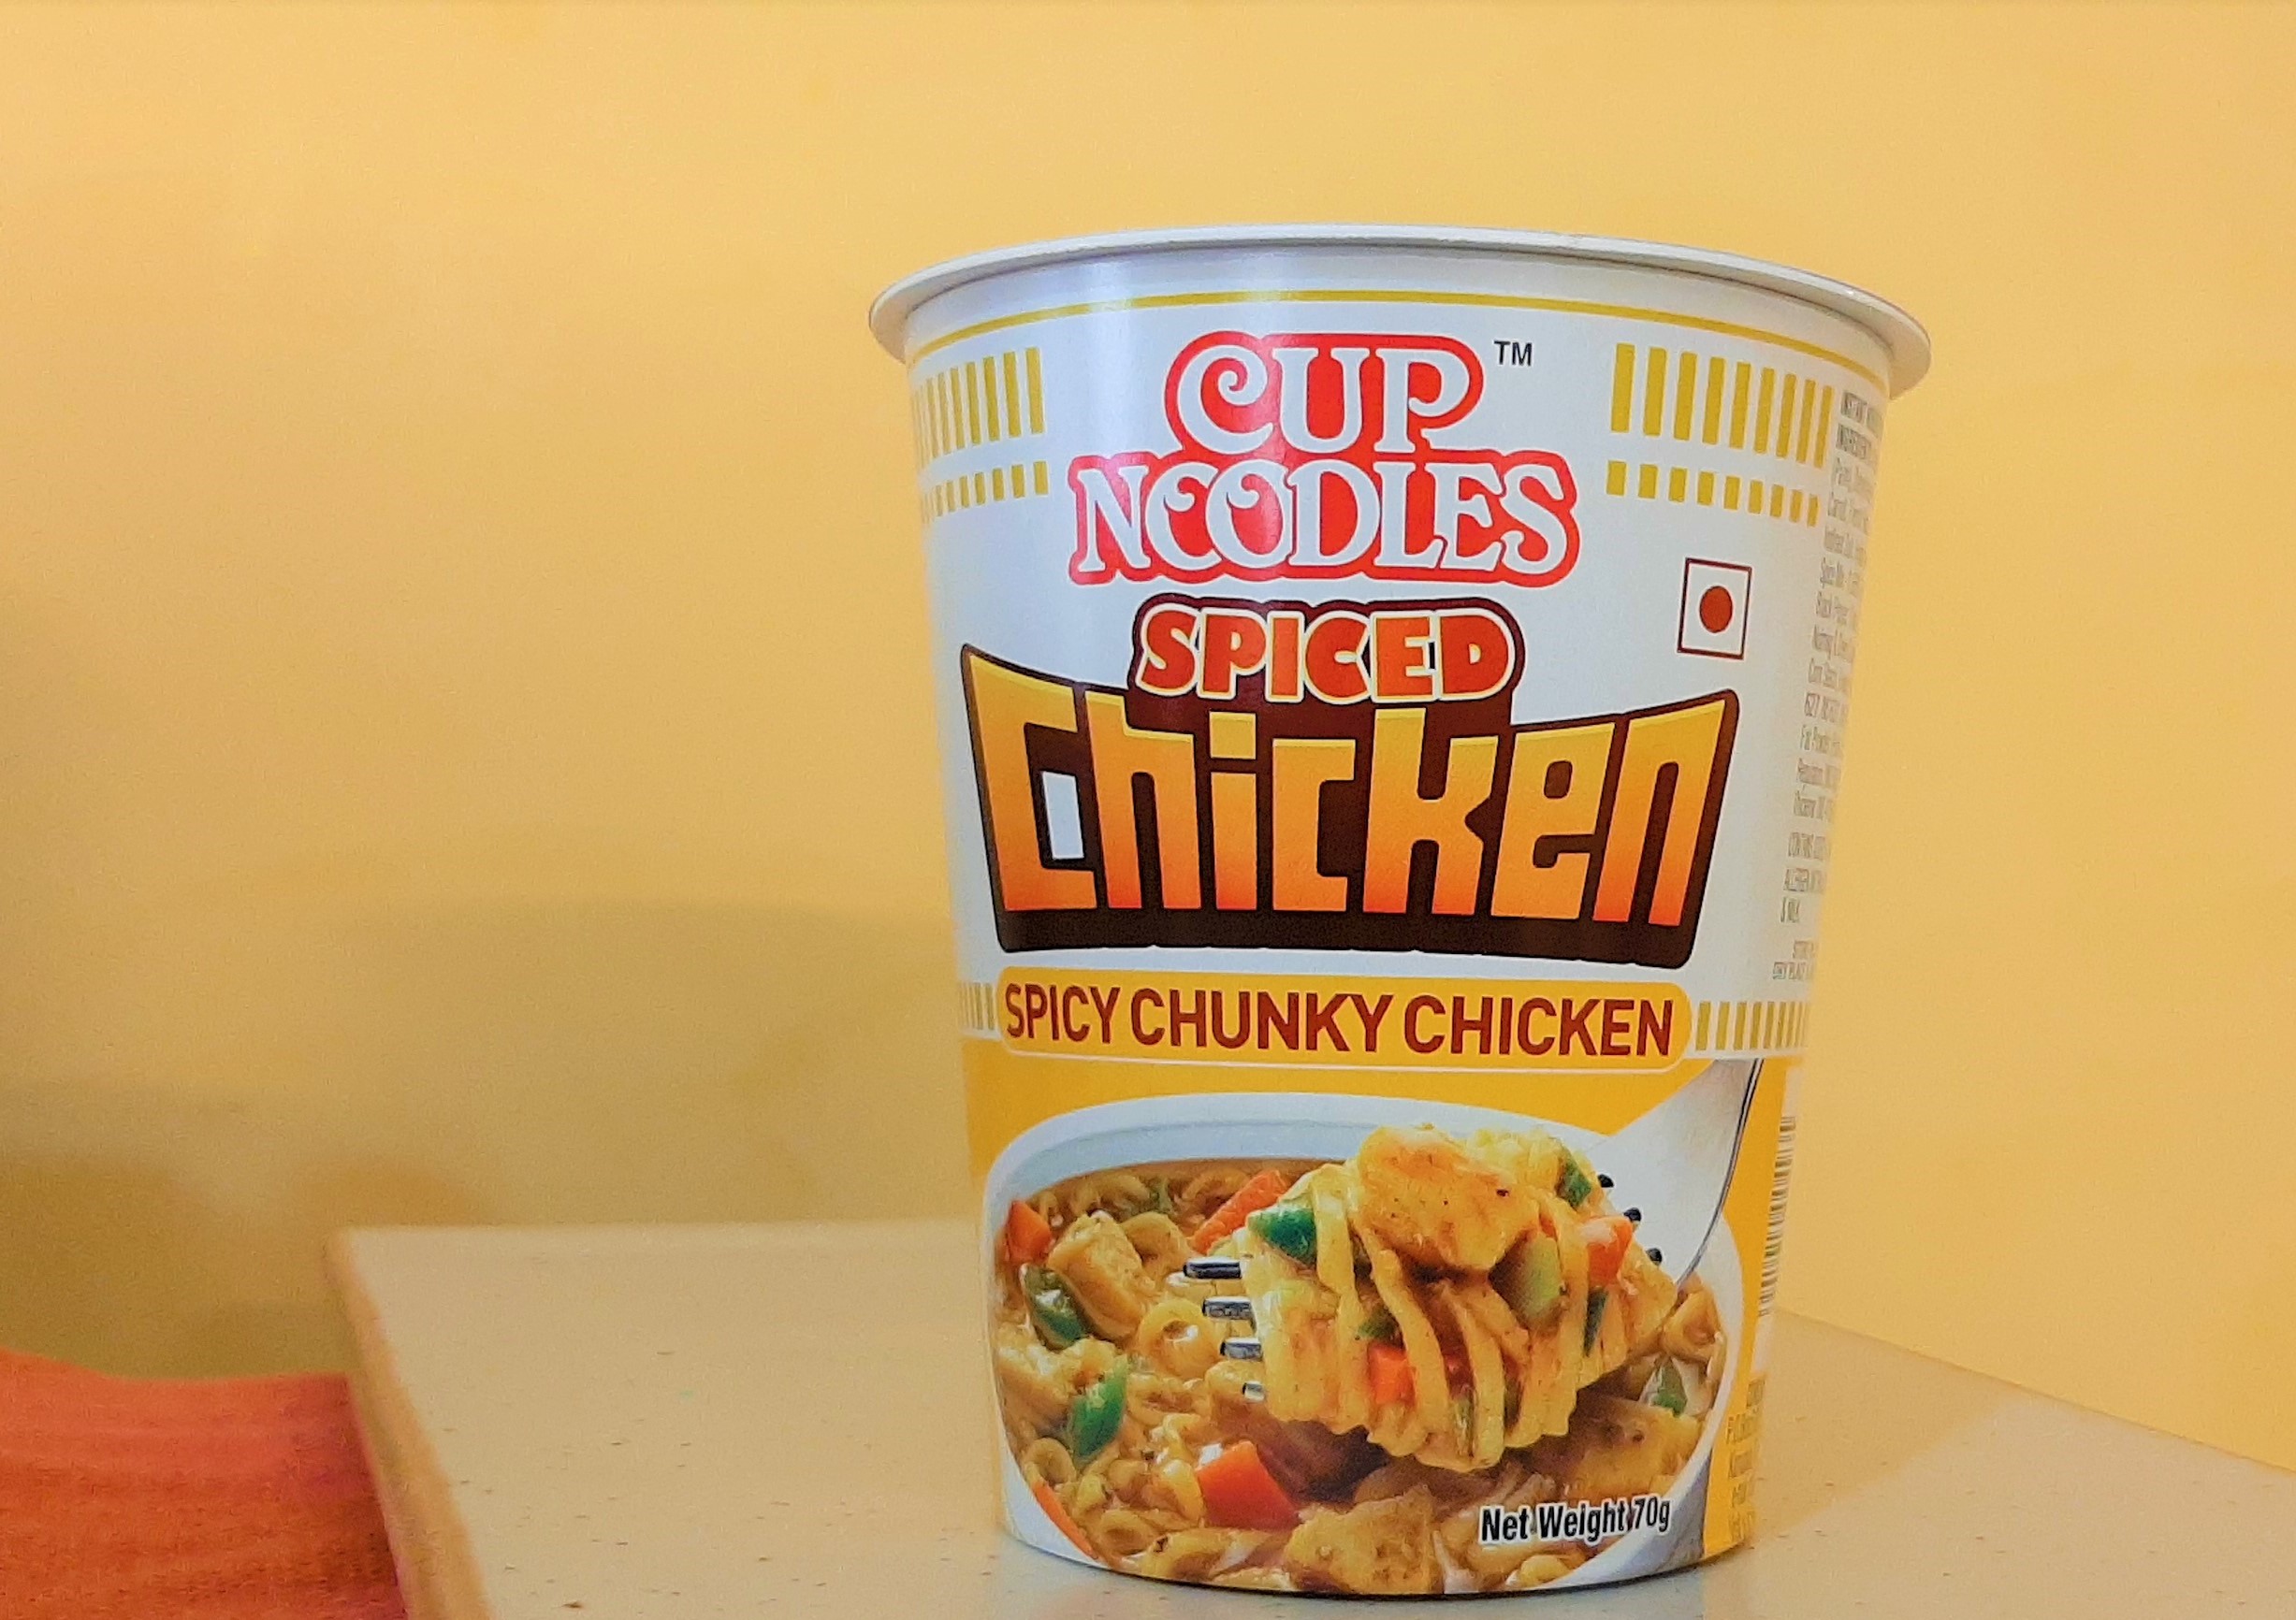 Nissin Cup Noodles-mishry